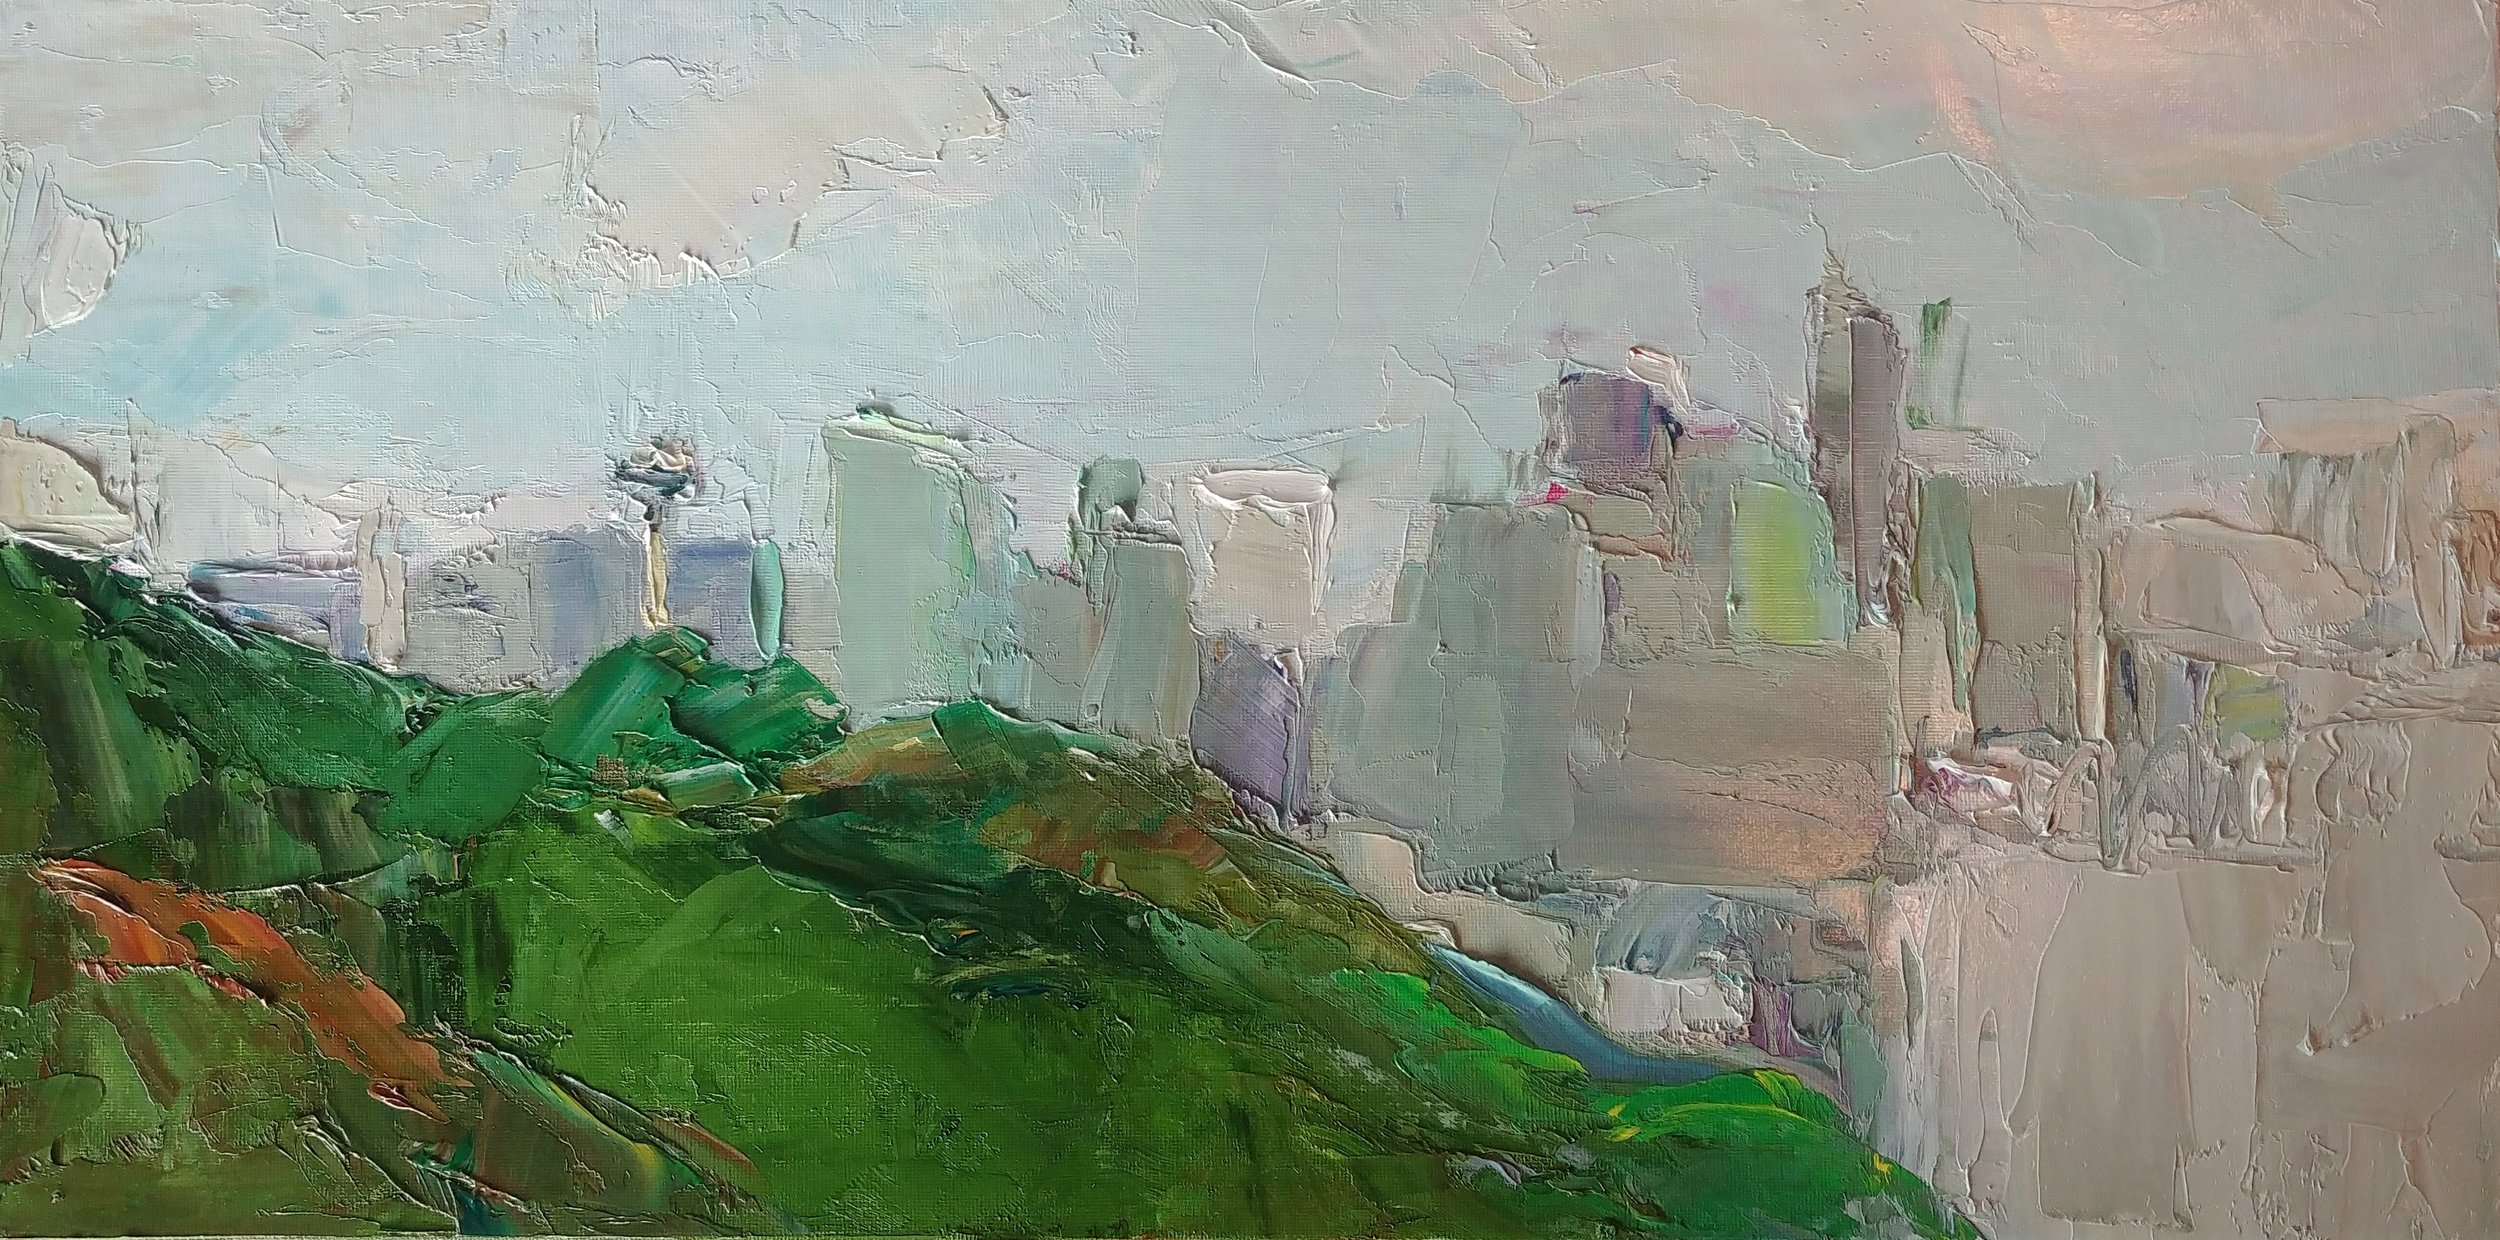  May Evening View from Ella Bailey Park, Seattle, 2019 Oil on canvas board, 12 x 24” Sold 